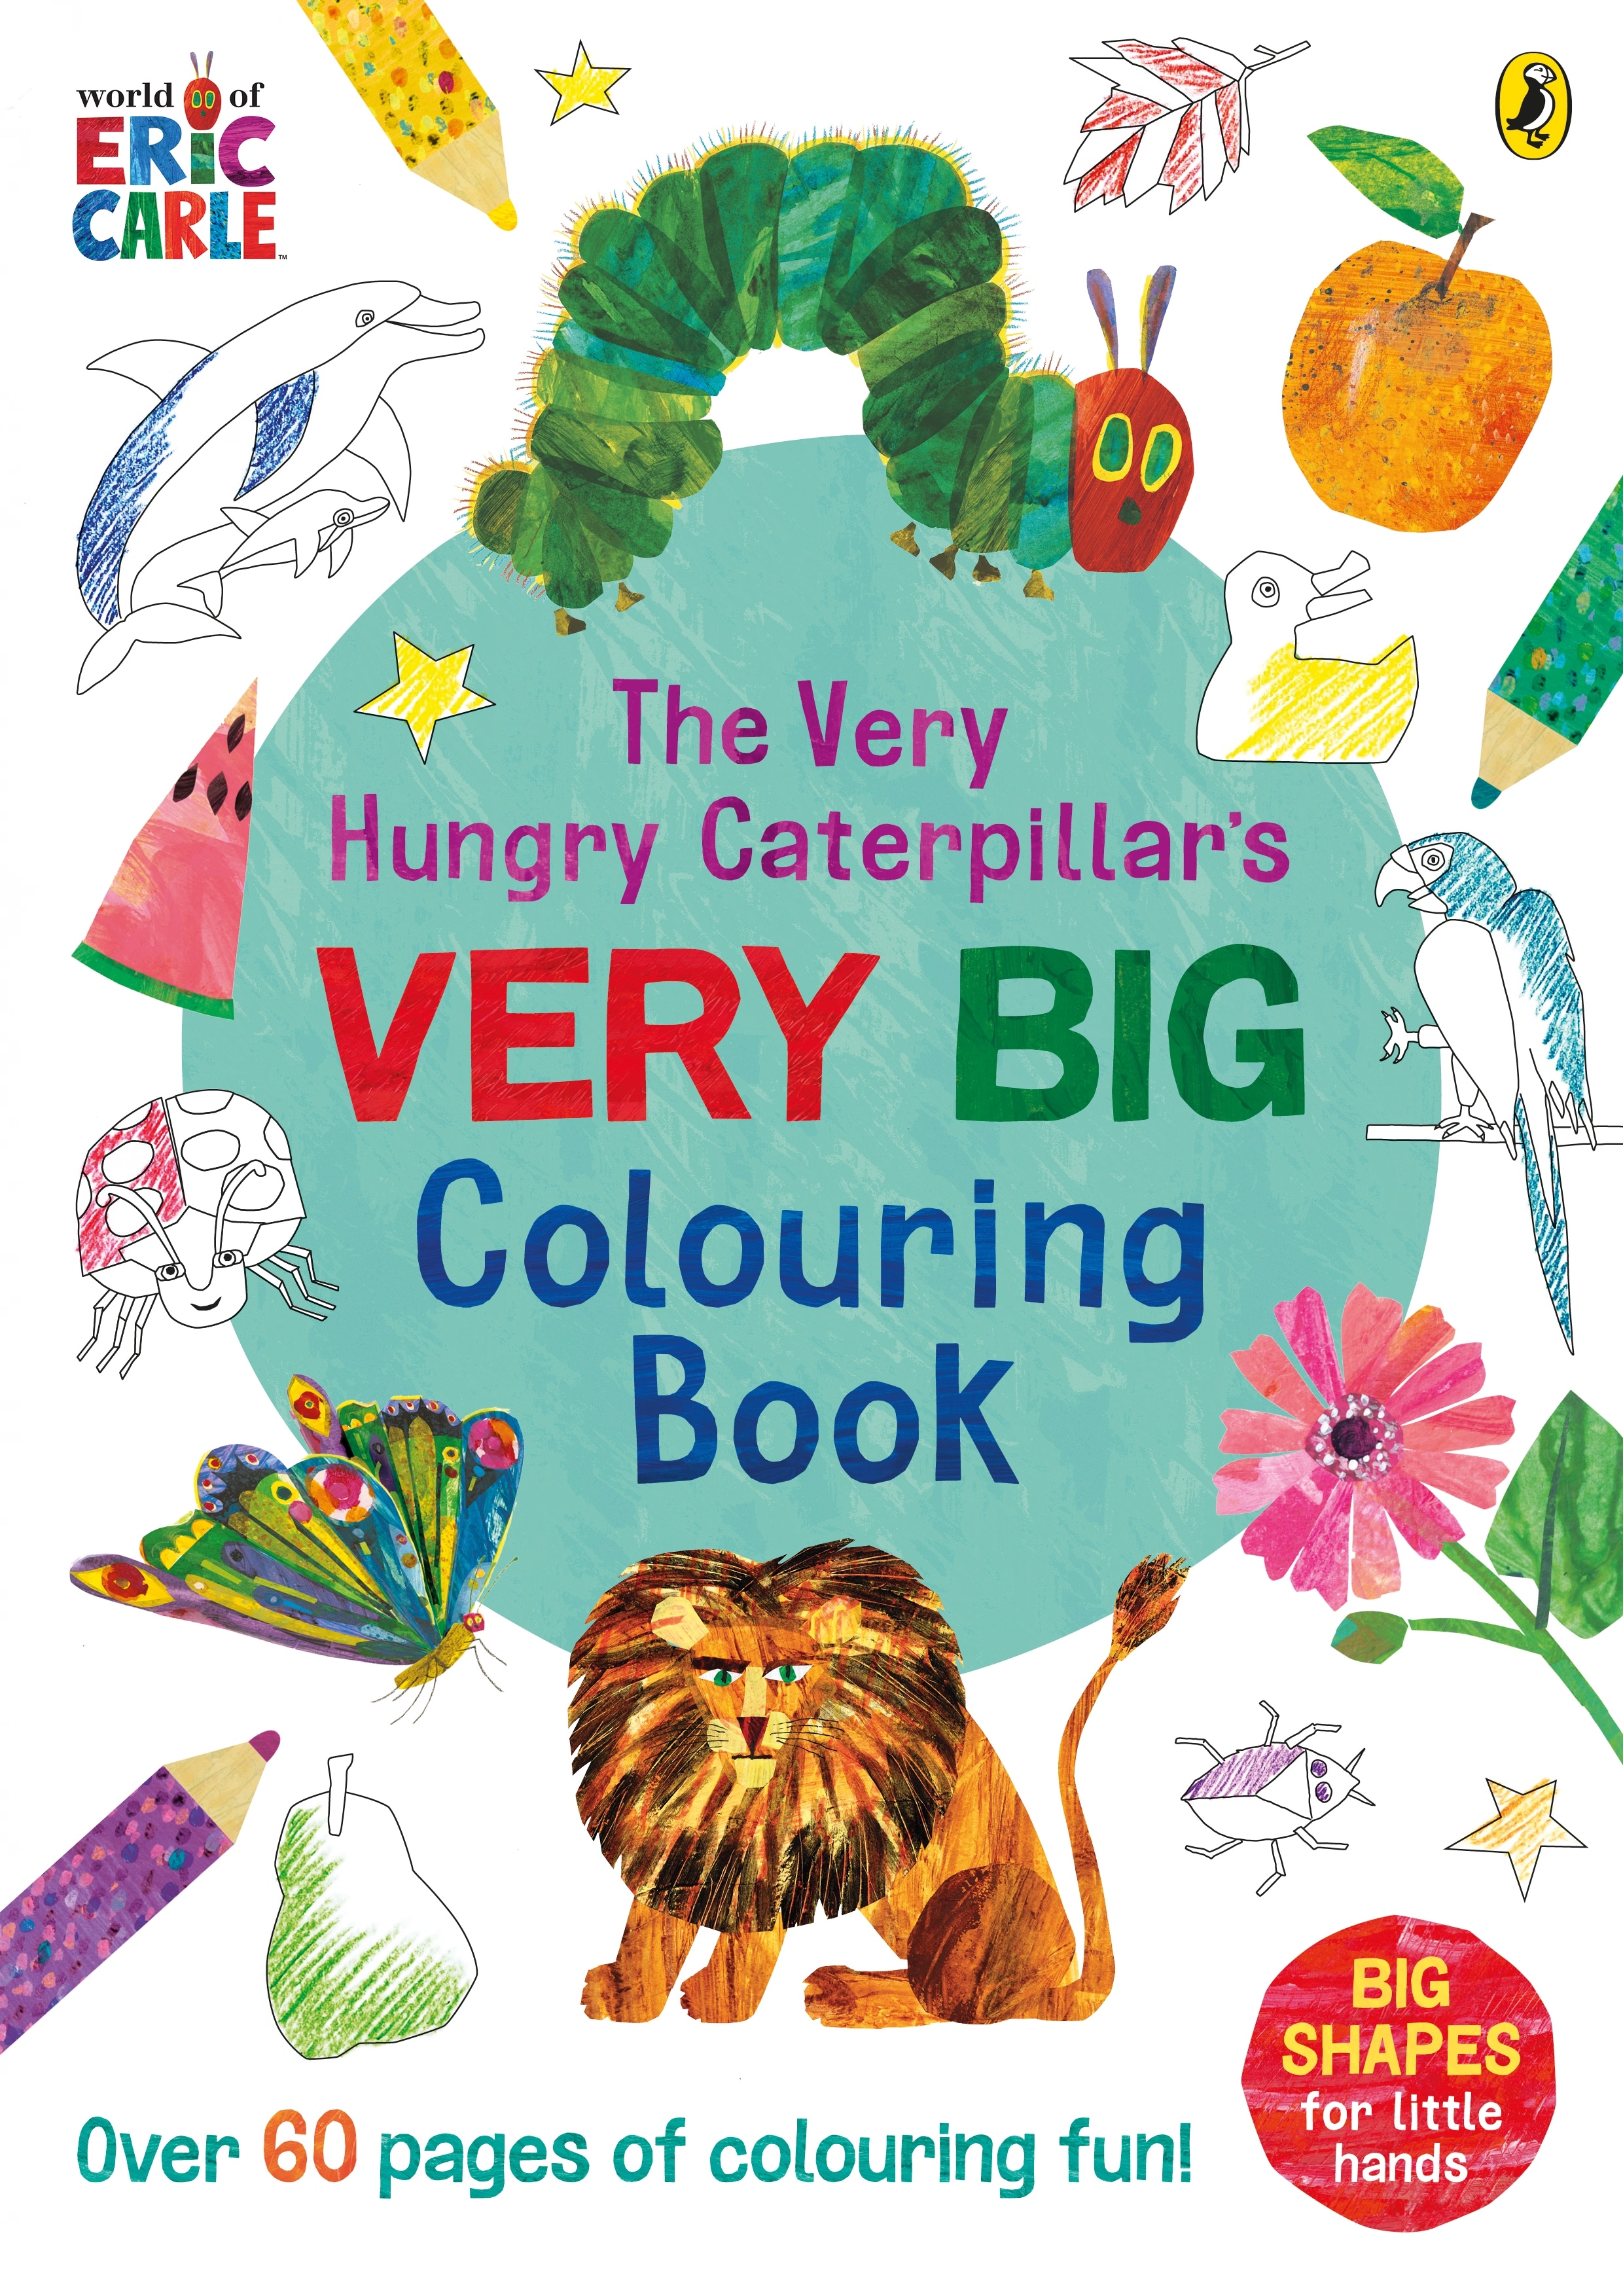 Book “The Very Hungry Caterpillar's Very Big Colouring Book” by Eric Carle — October 13, 2022